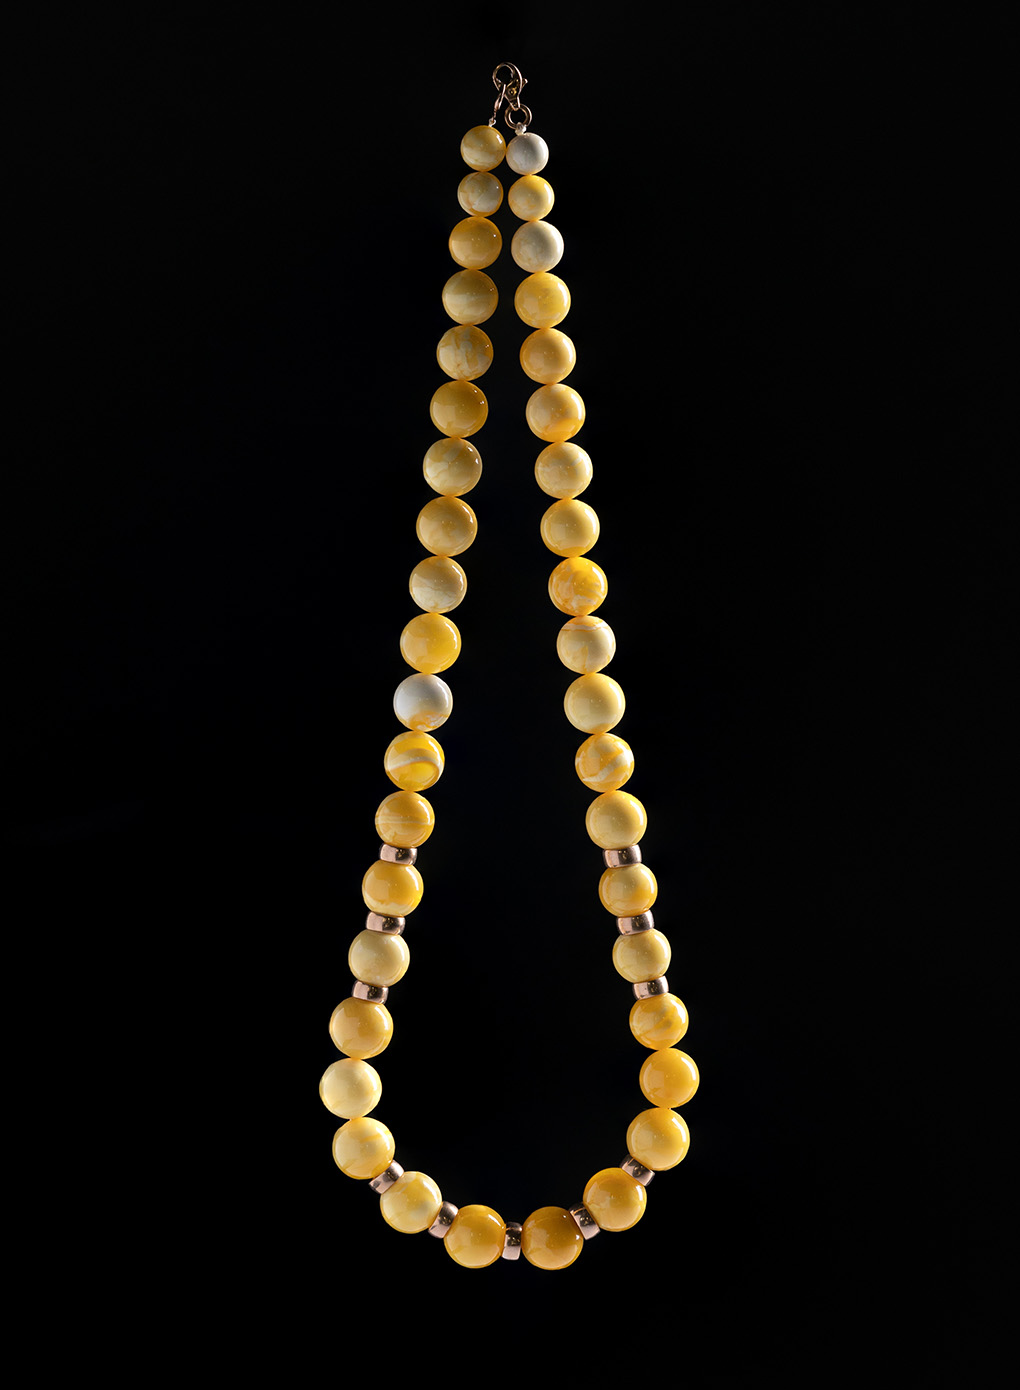 YELLOW & WHITE BALTIC NECKLACE